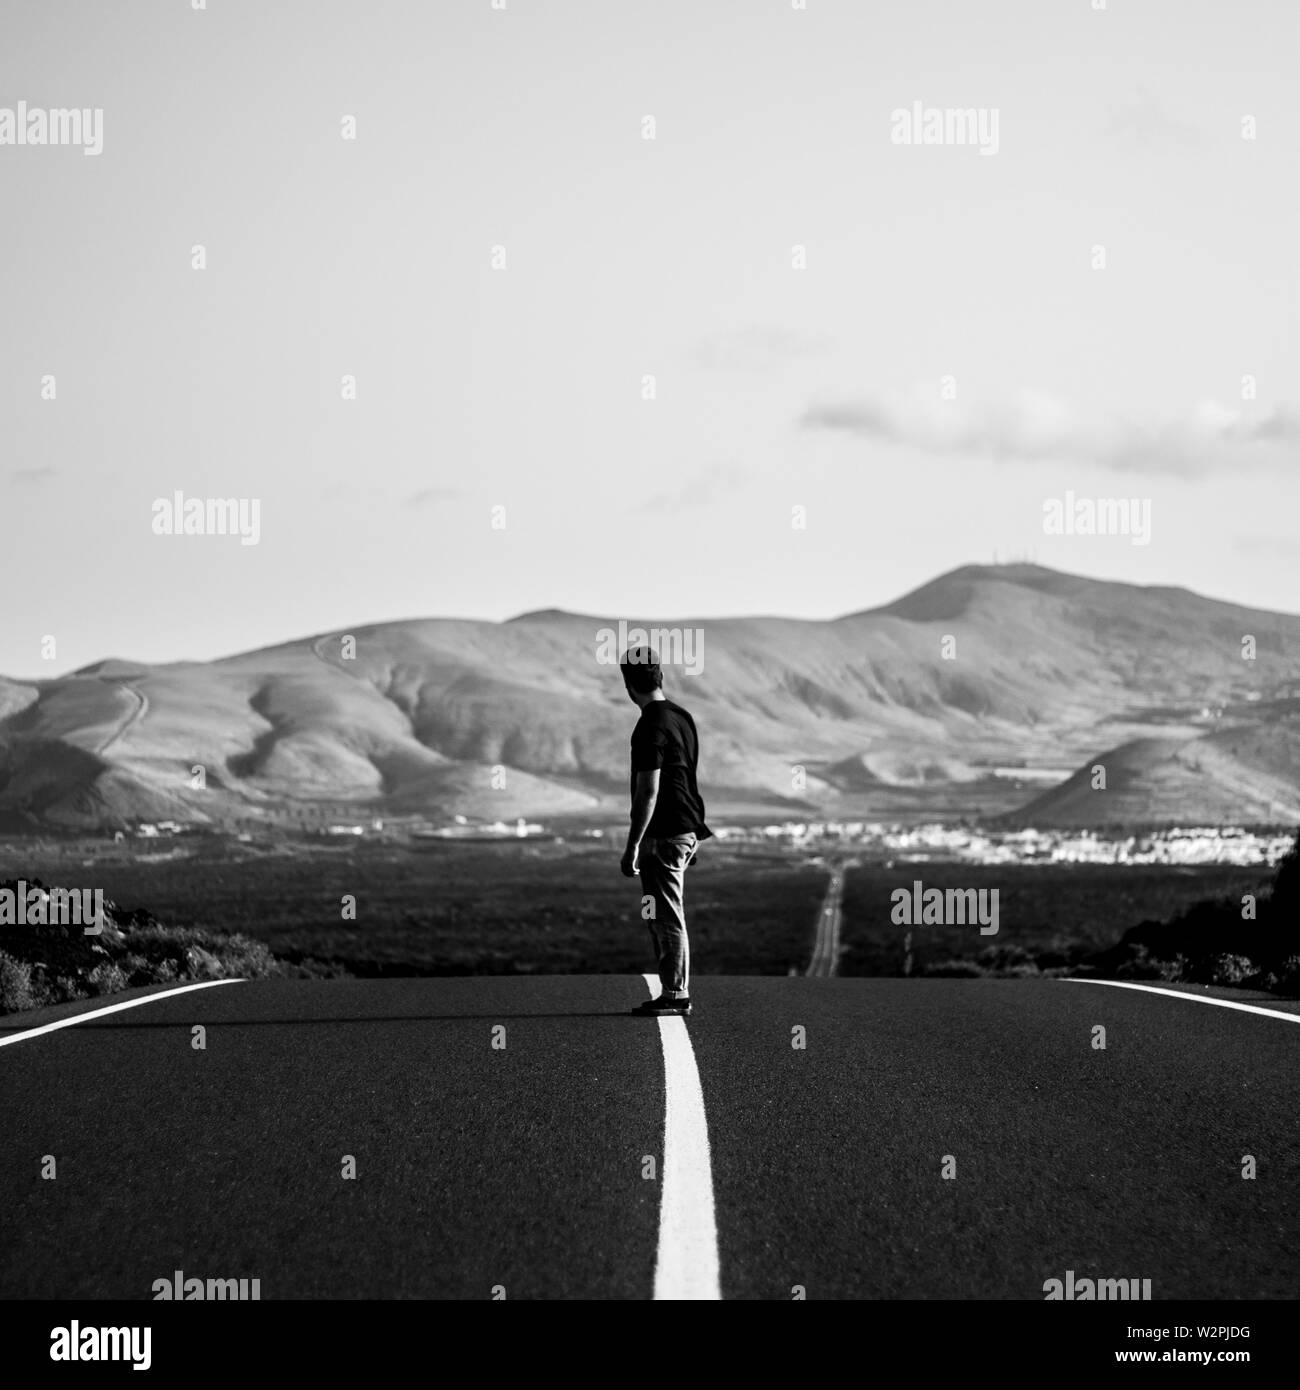 Male on a skateboarder riding on an empty highway road with amazing hills in the background Stock Photo